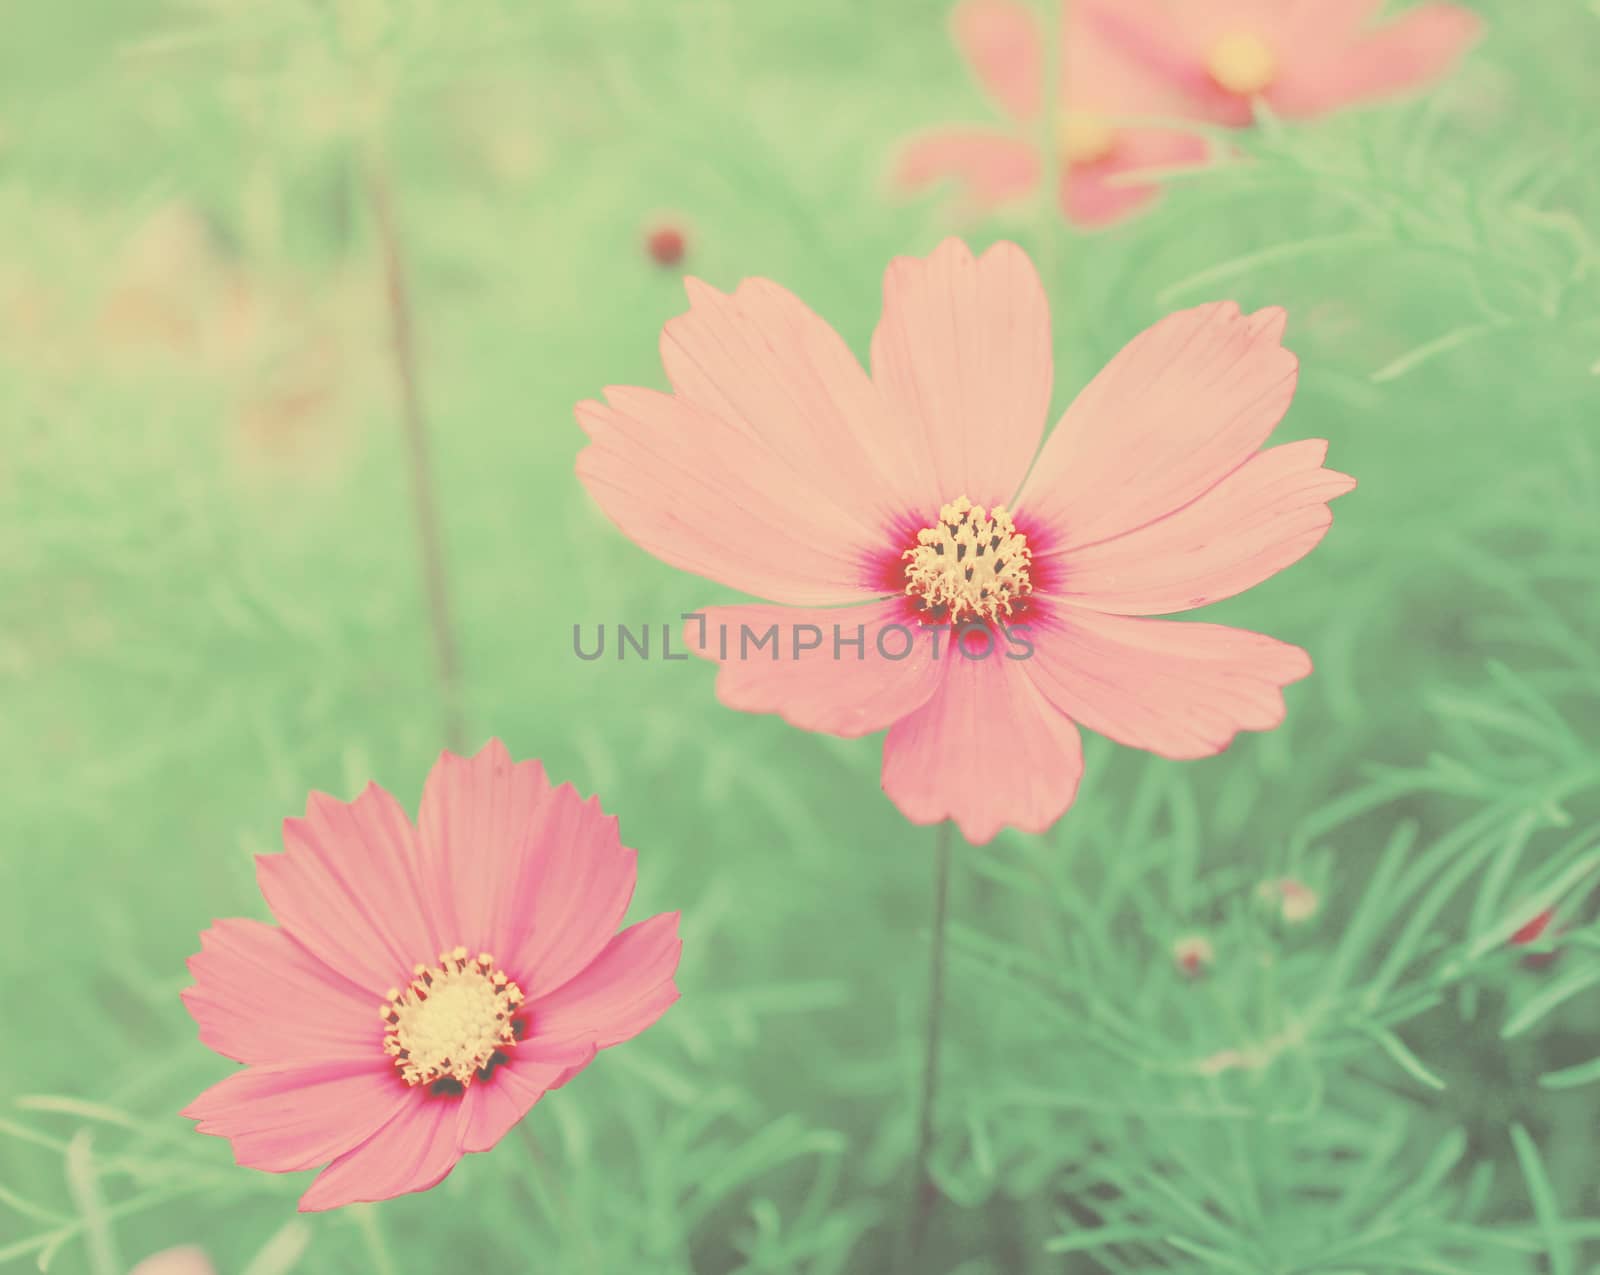 Pink blossom flowers with retro filter effect by nuchylee